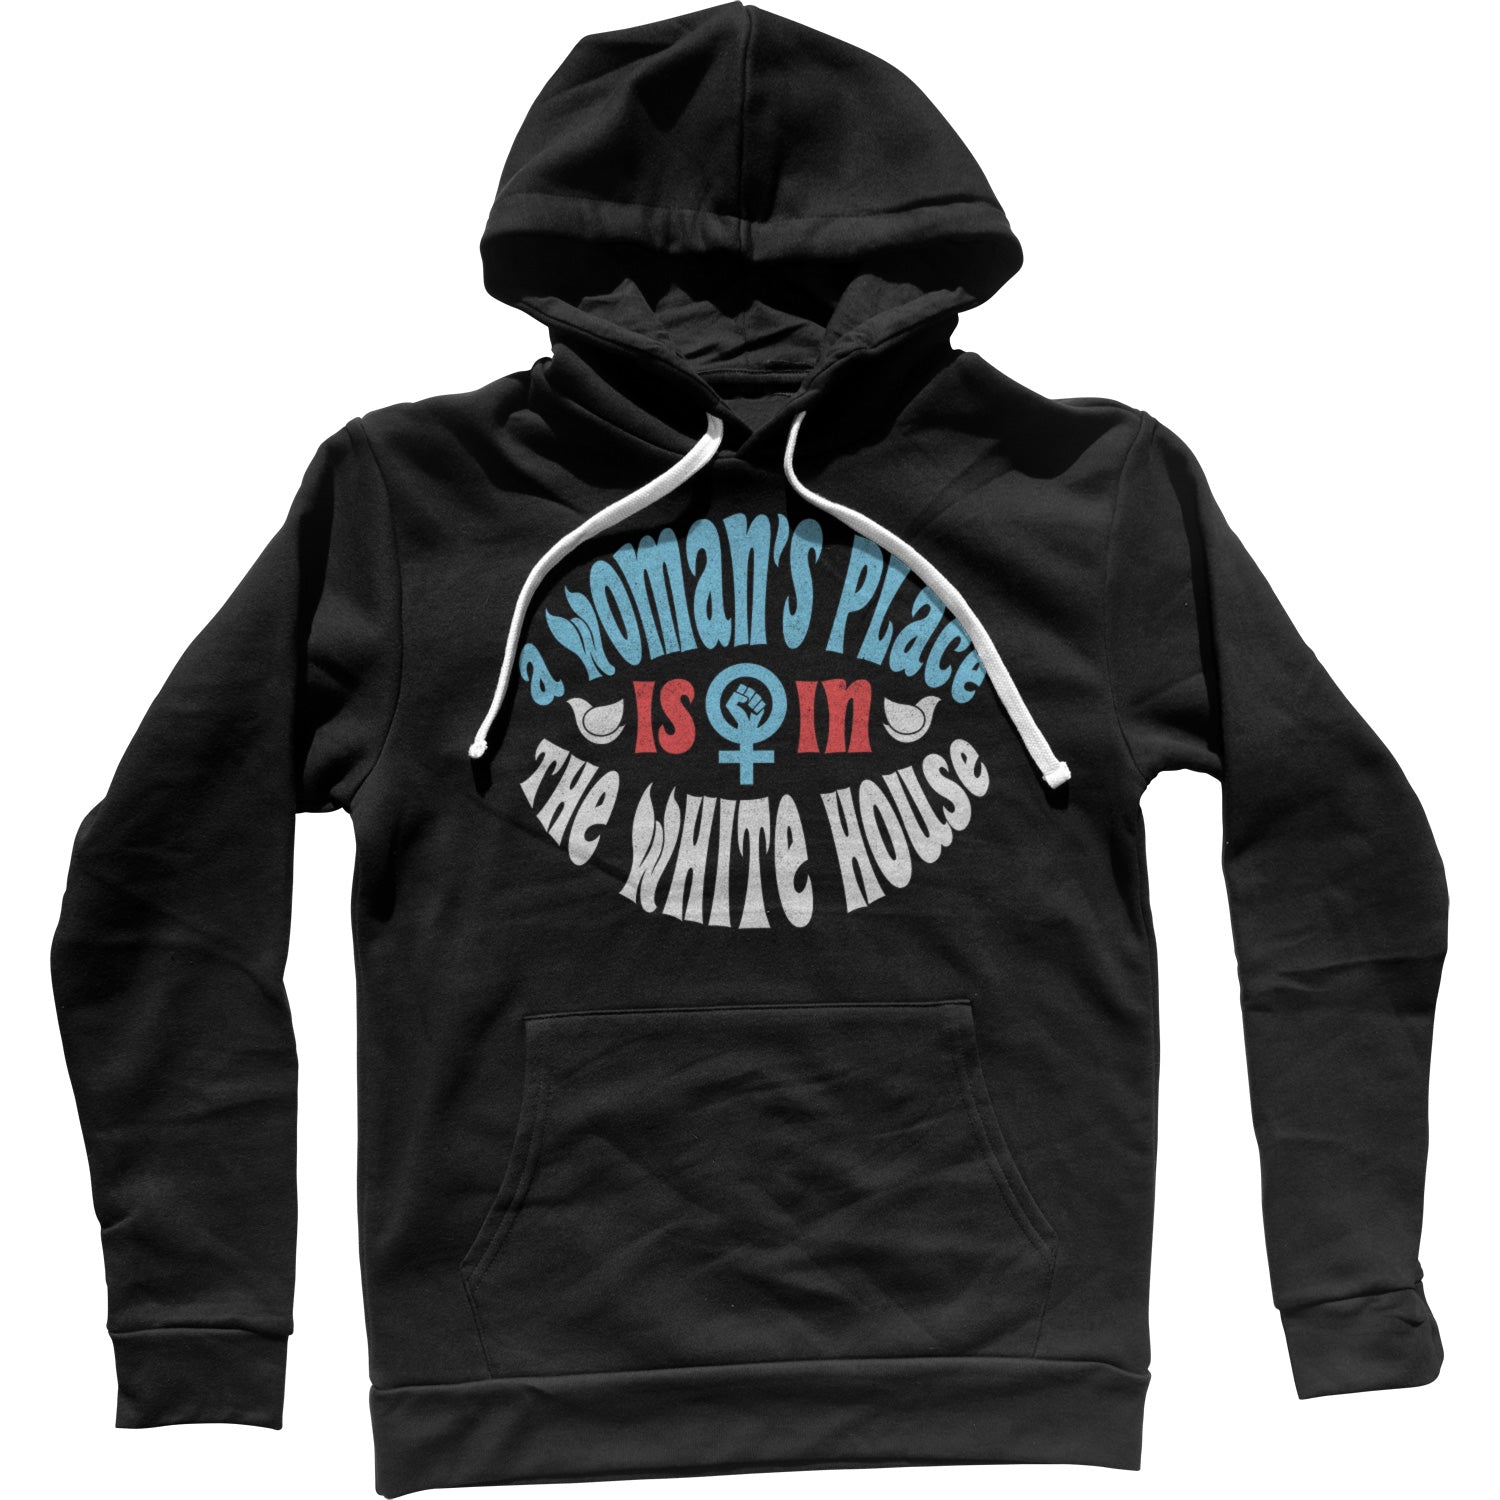 A Woman's Place is in The White House Unisex Hoodie